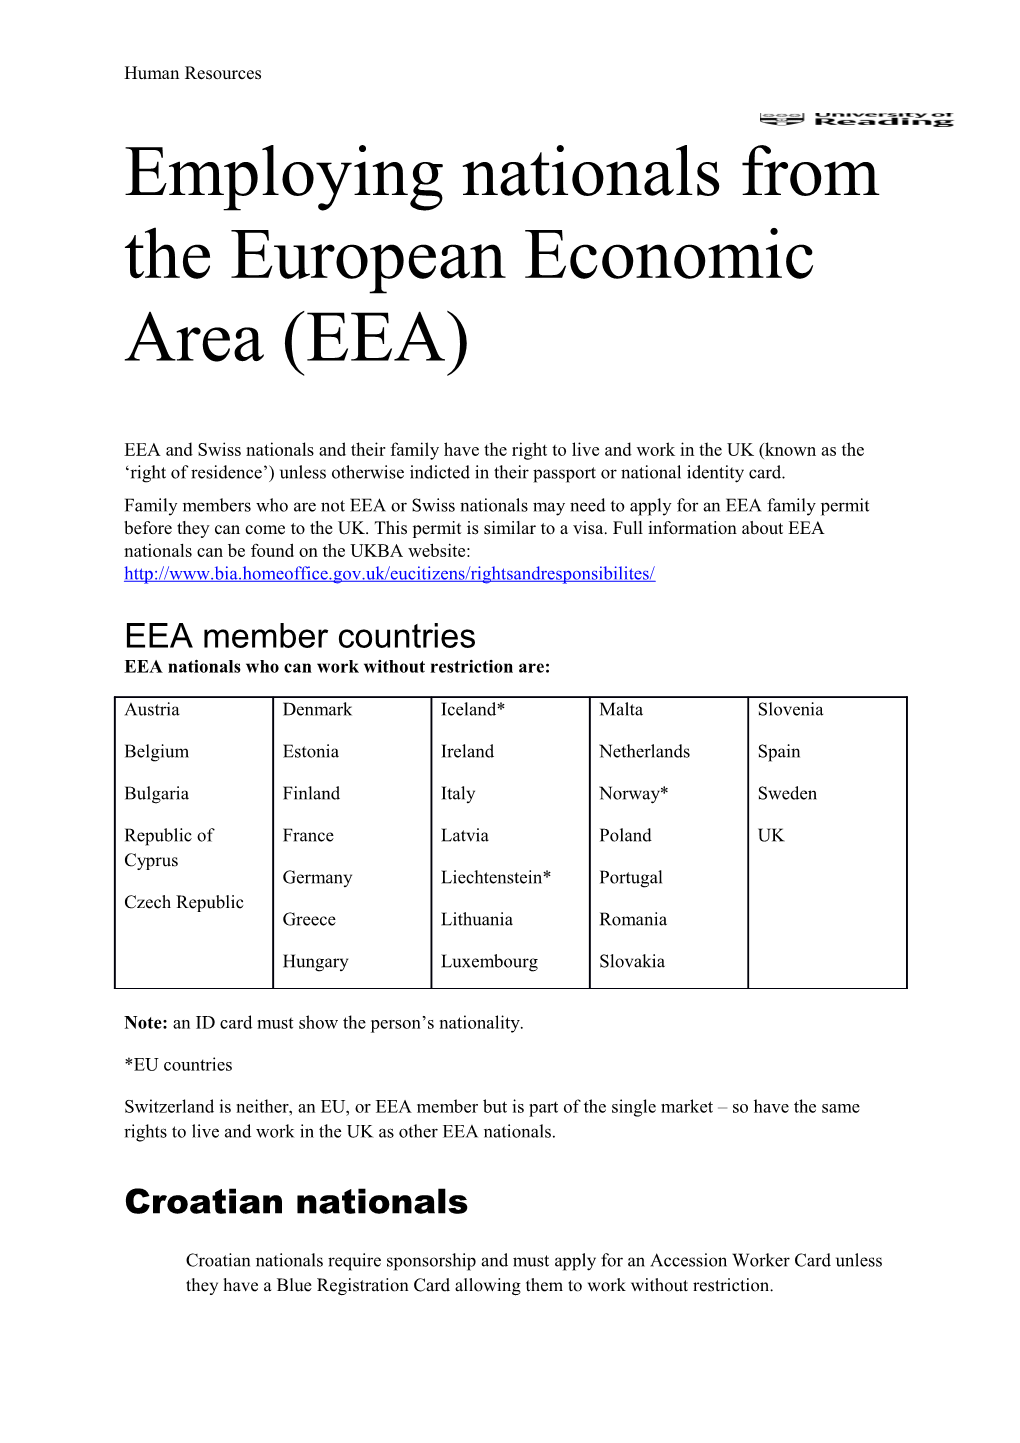 Employing Nationals from the European Economic Area (EEA)